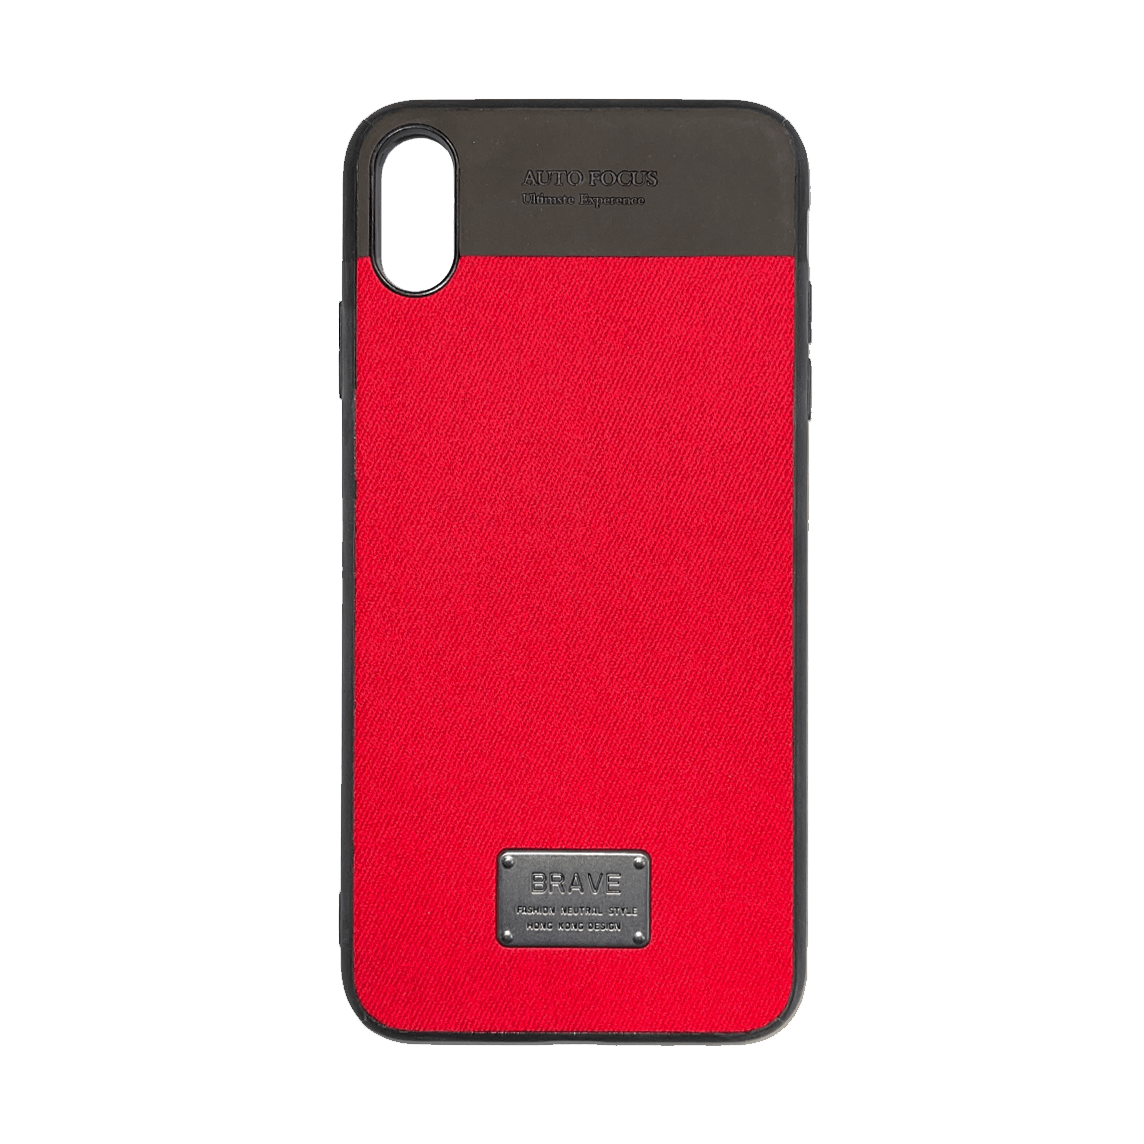 S&G Brave Case For iPhone XS Max